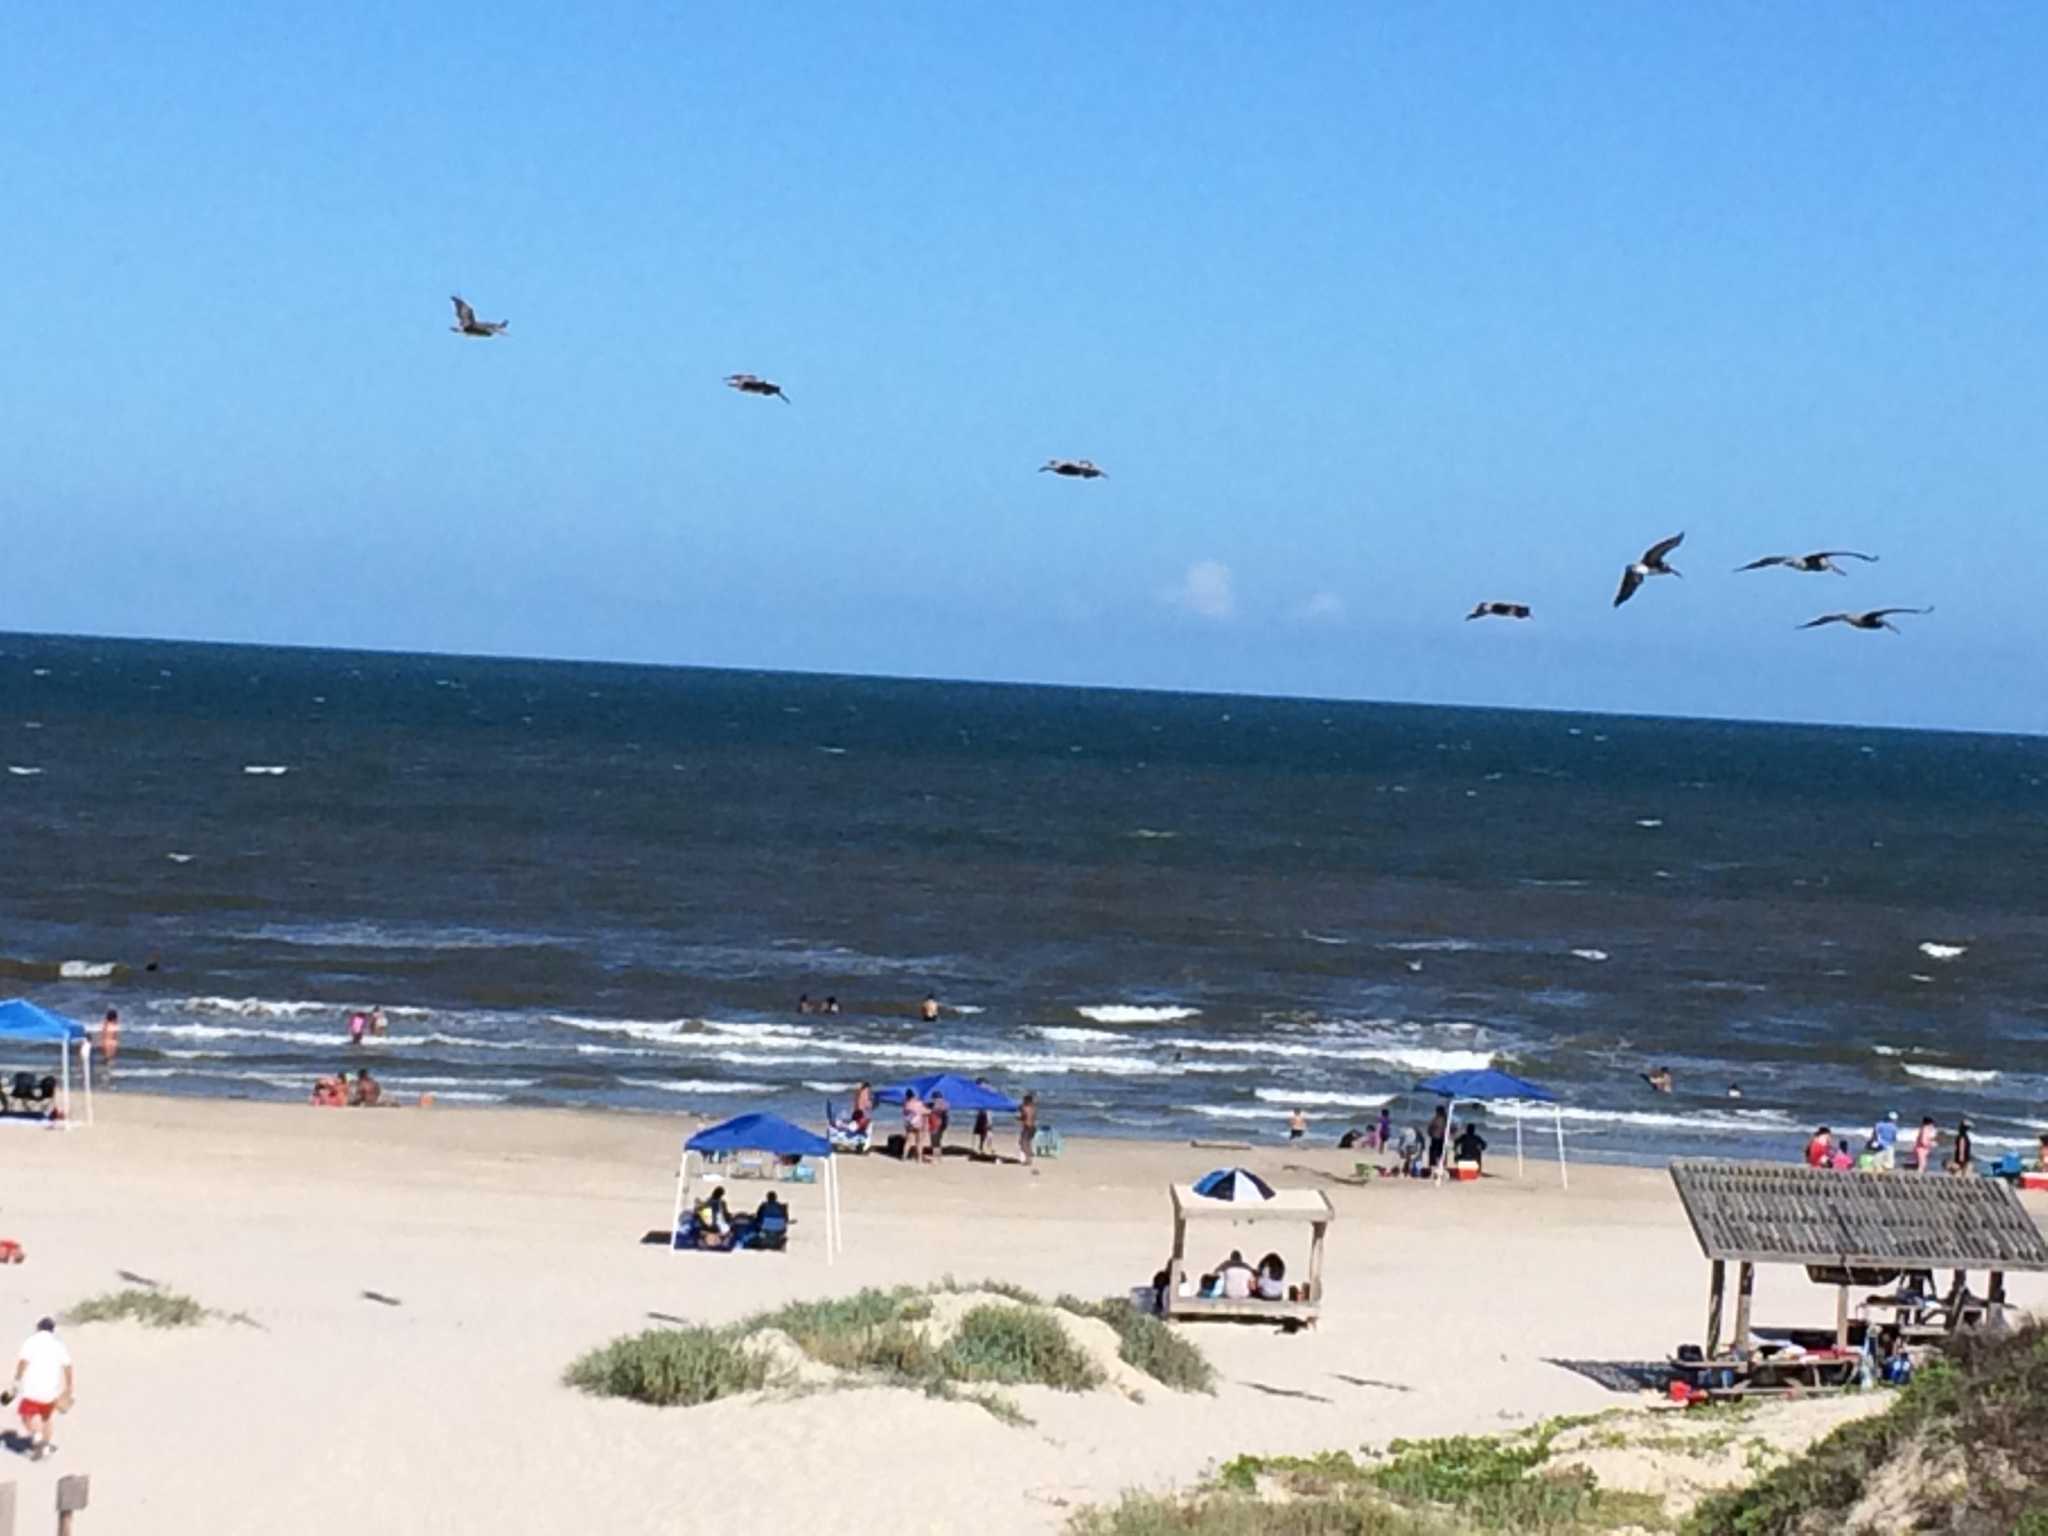 Padre Island National Seashore has reopened, but there are some changes